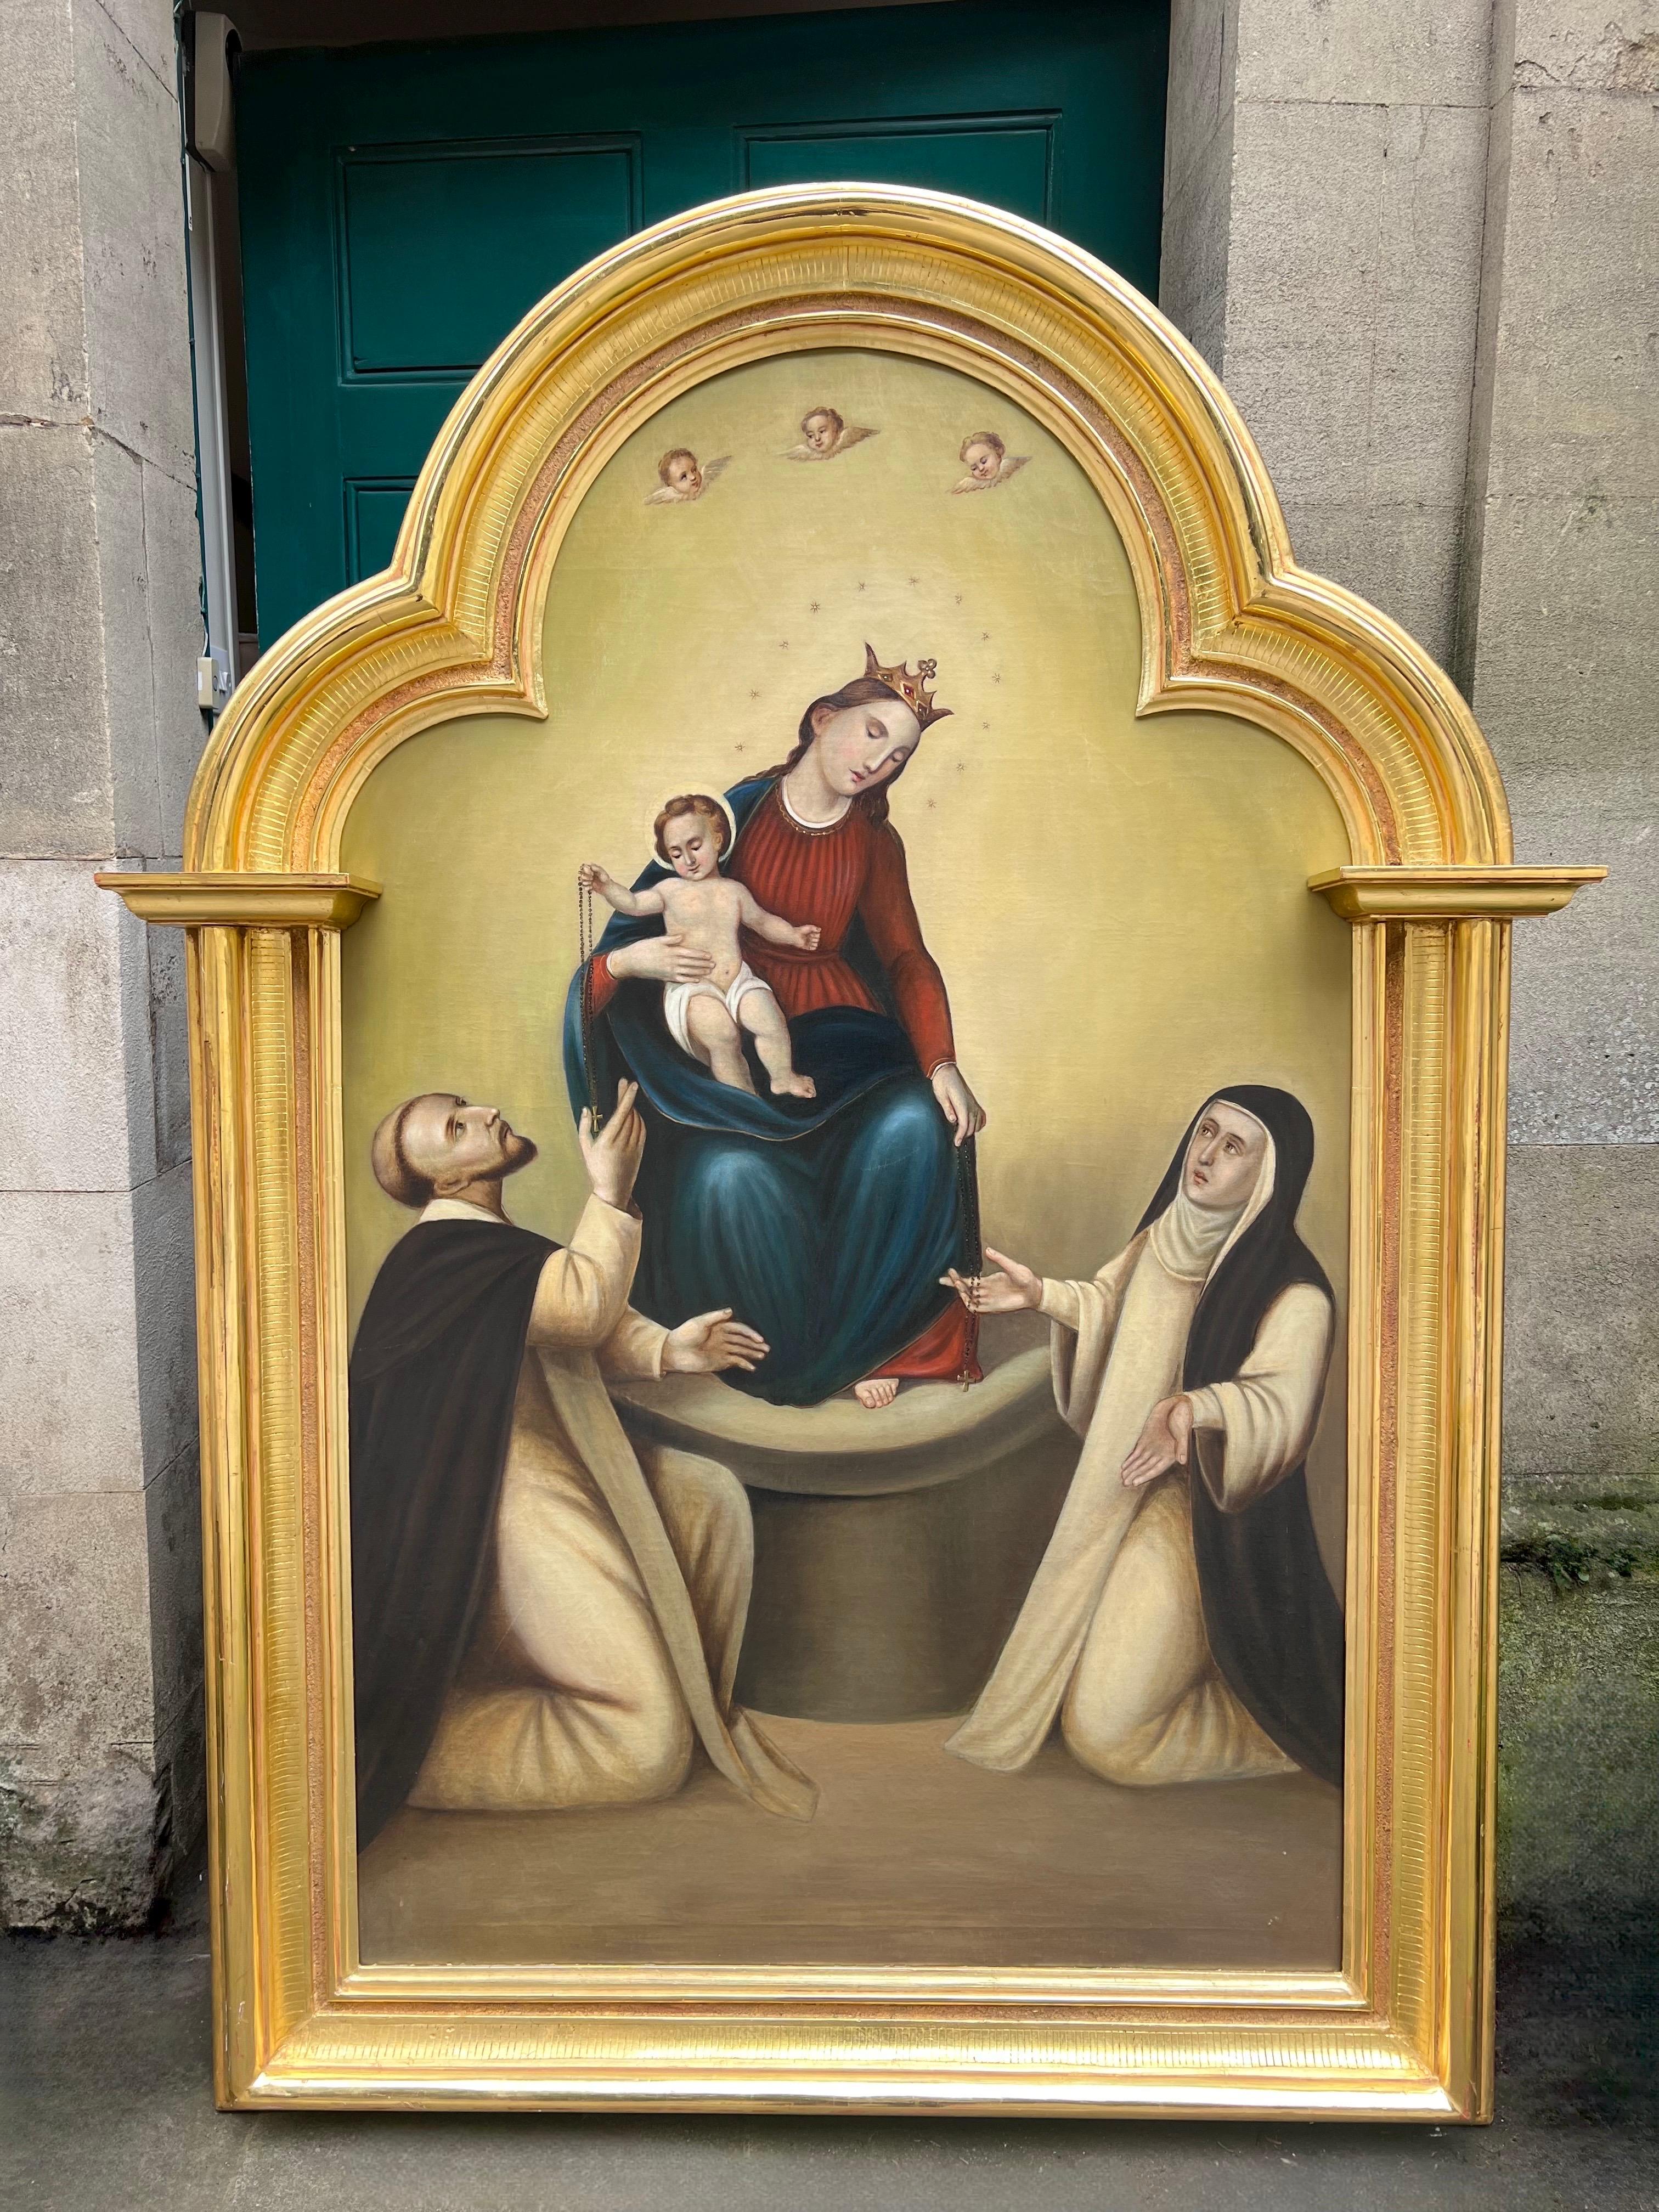 Adoration of the Madonna & Christ Child
German Baroque artist, late 19th century
oil painting on canvas
framed within highly ornate gilt frame
overall size: 68 x 50 inches in total
condition: very good and presentable
provenance: the painting came